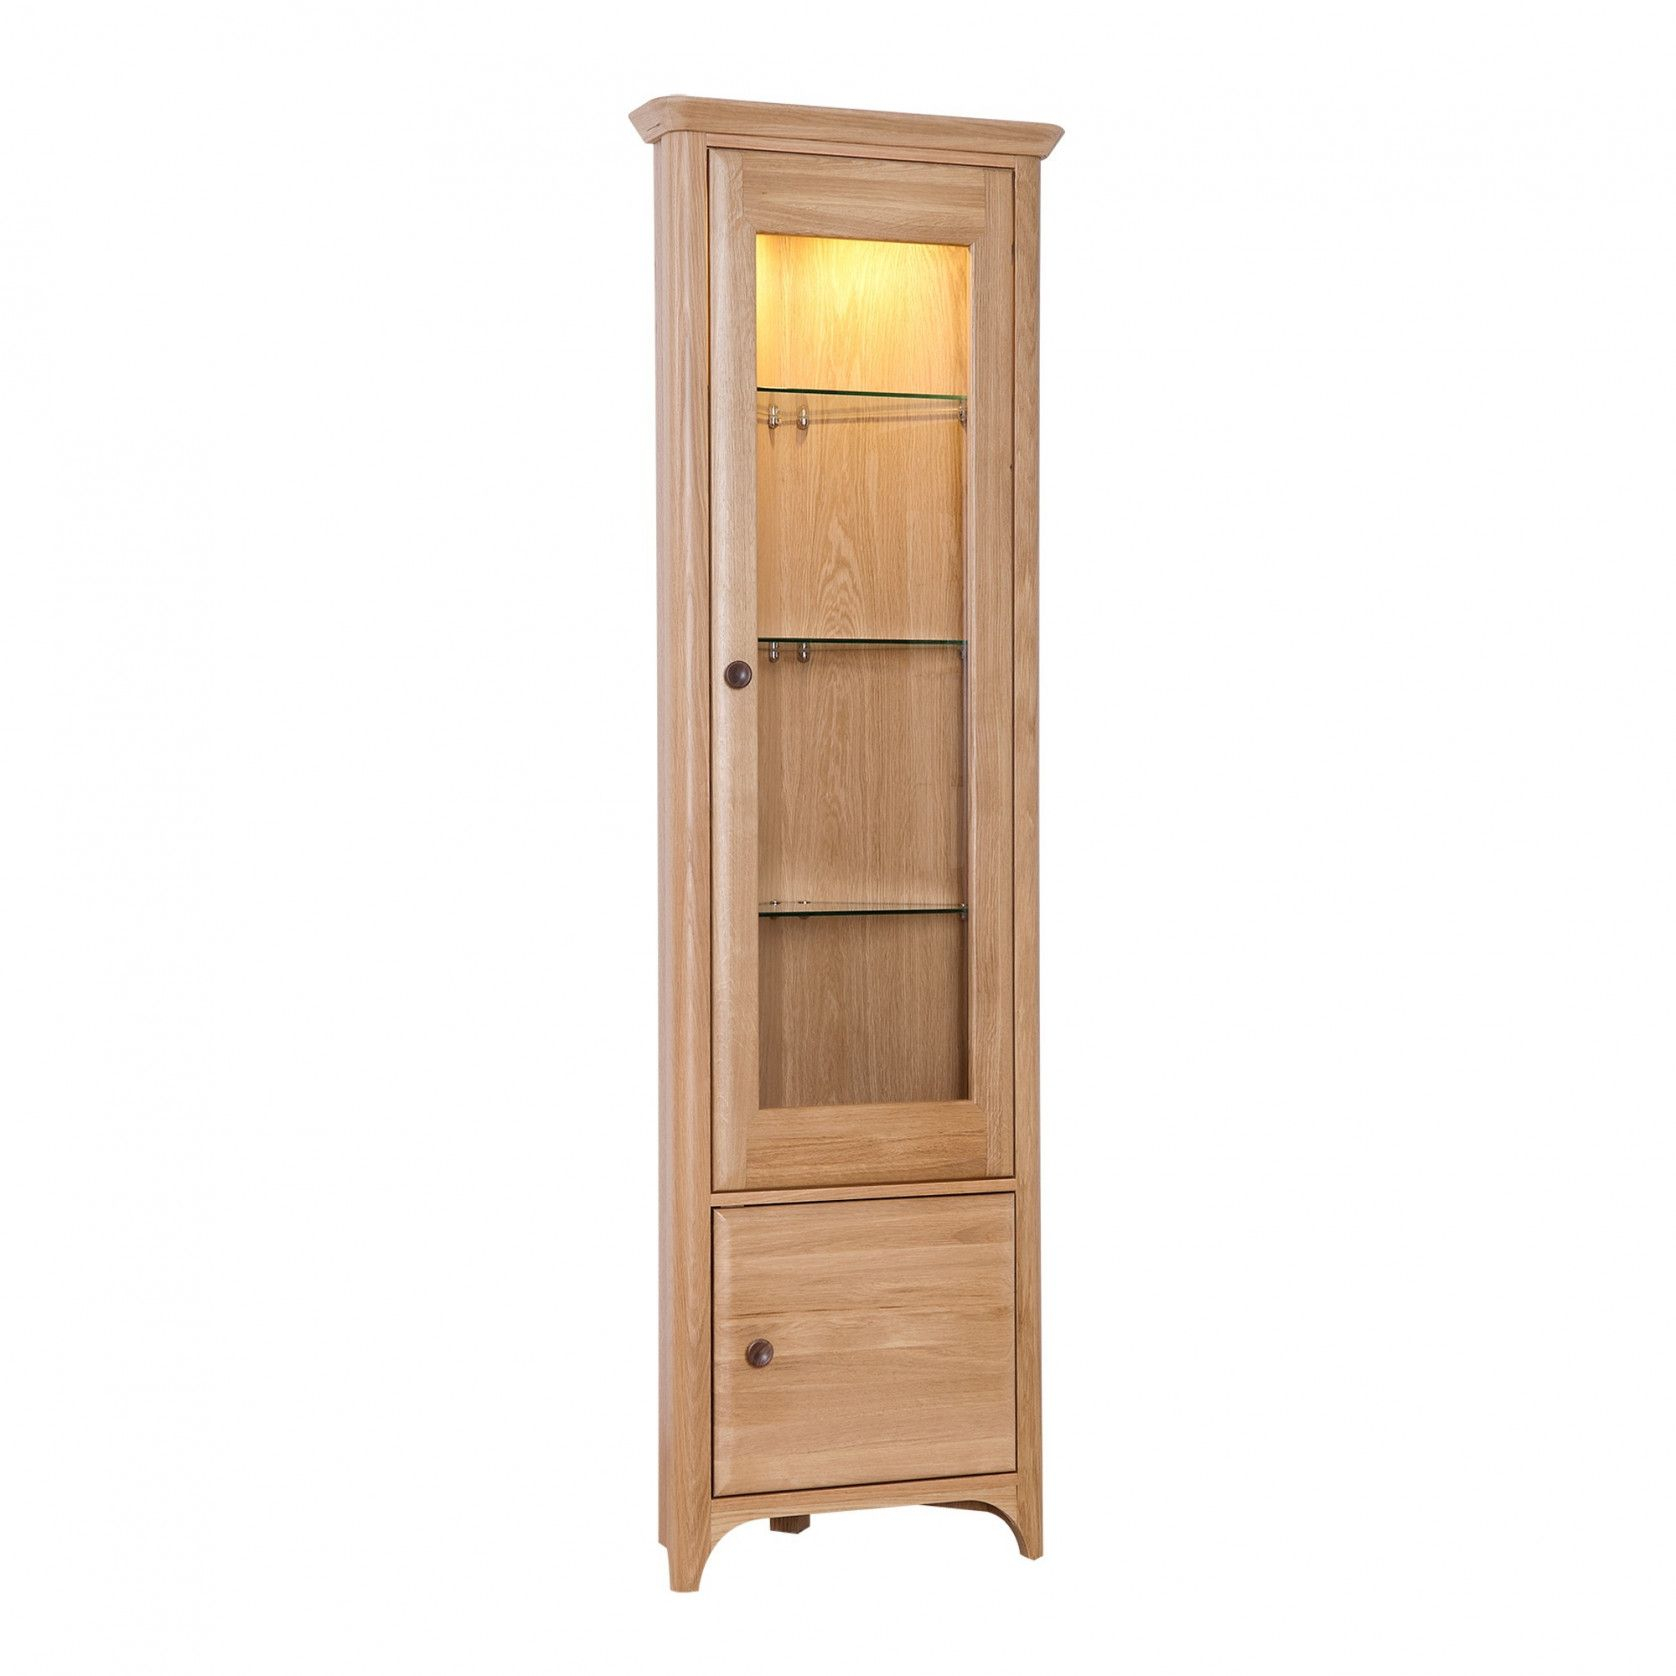 20 Oak Corner Display Cabinets With Glass Doors Small Kitchen inside dimensions 1676 X 1676